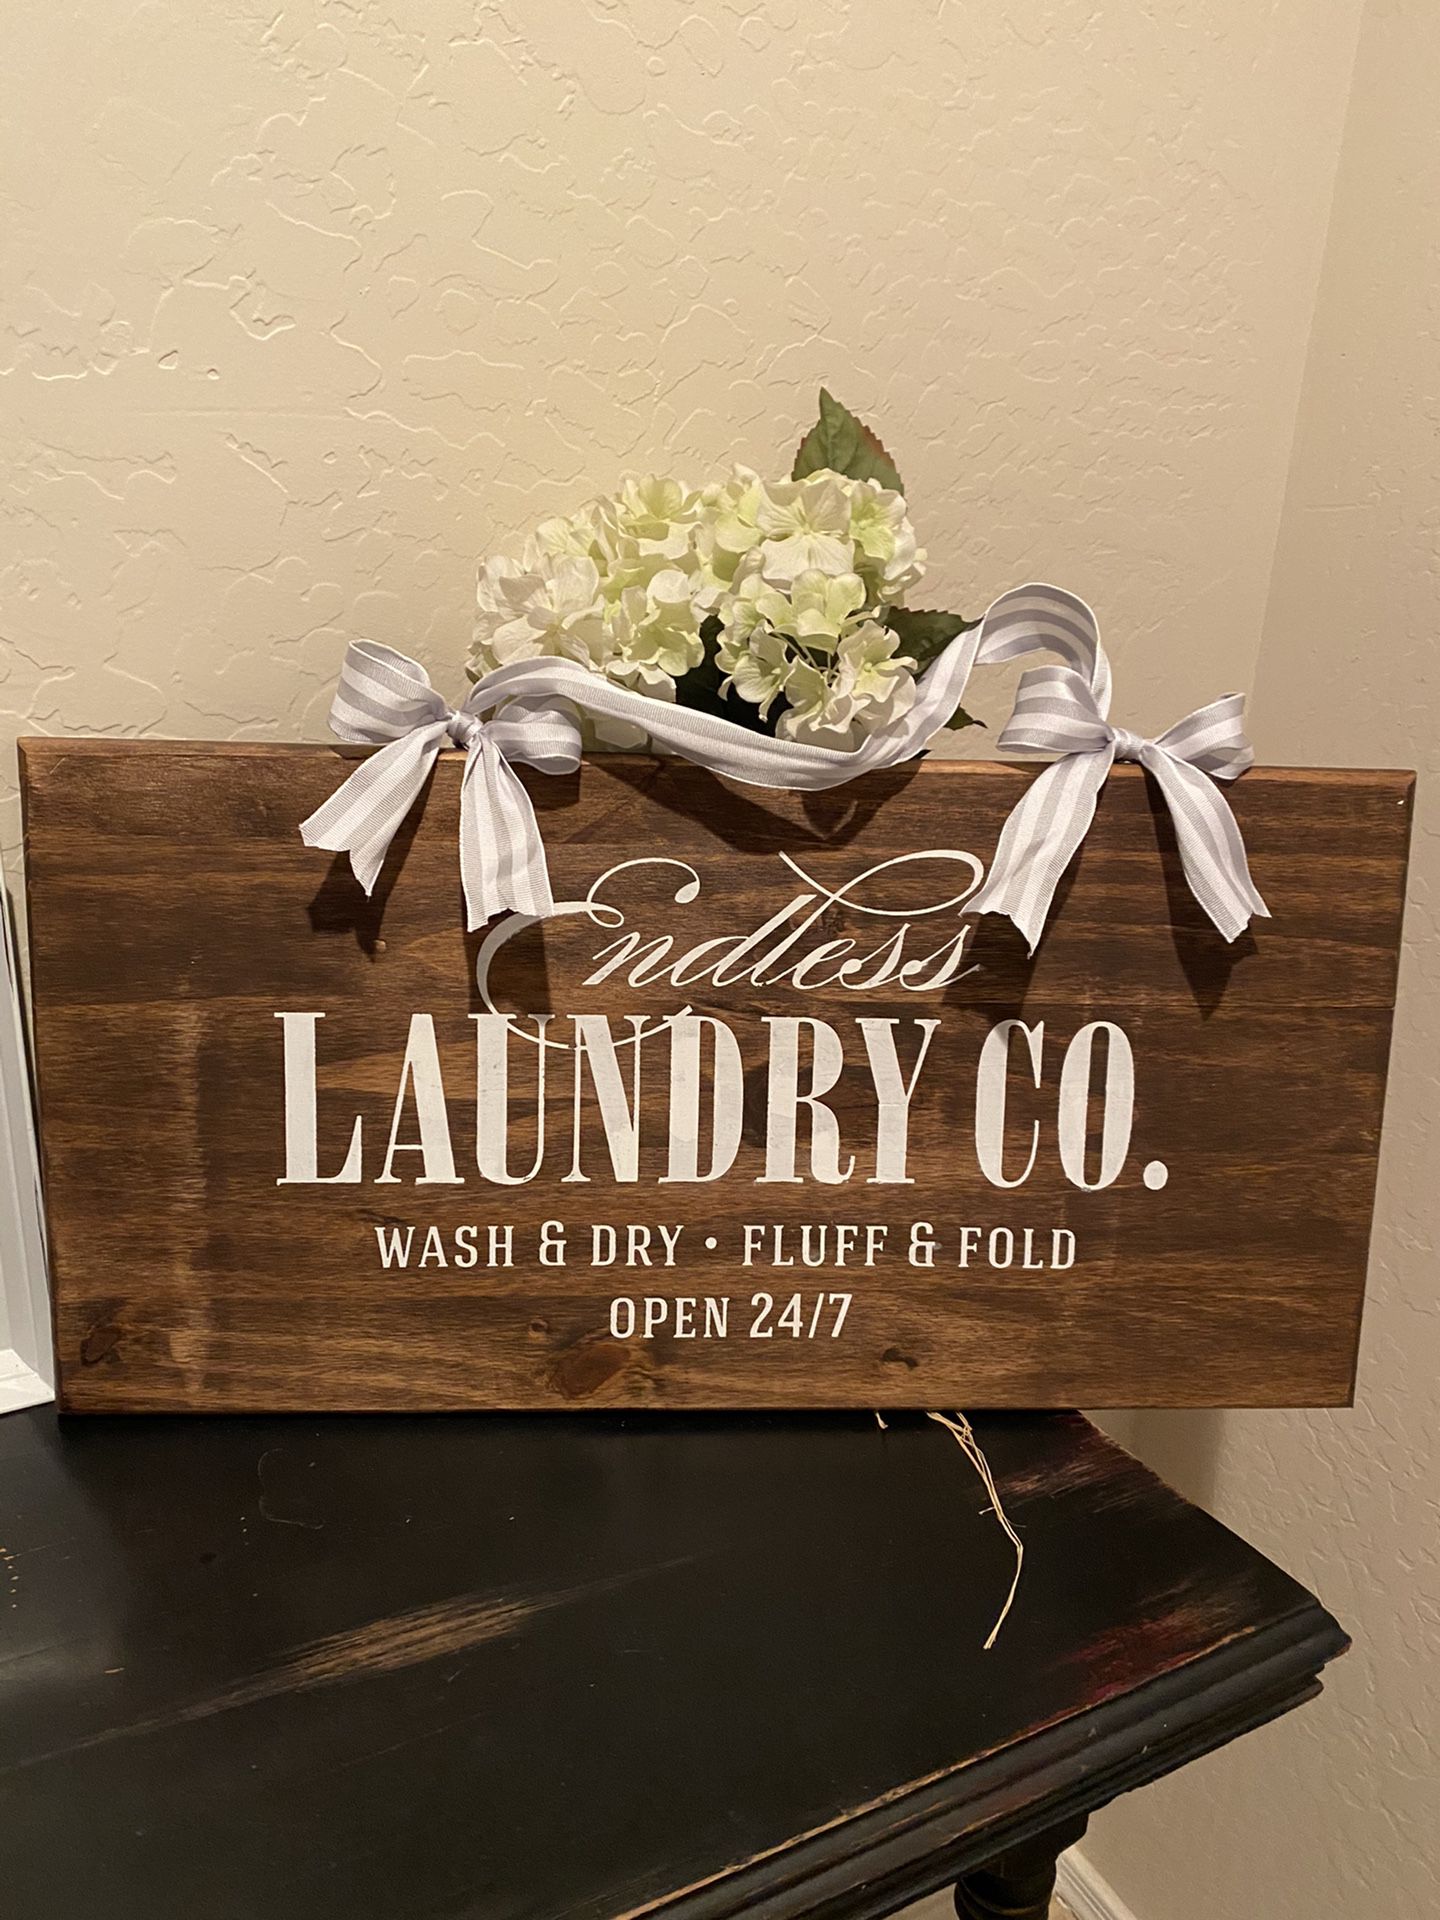 Endless laundry CO.